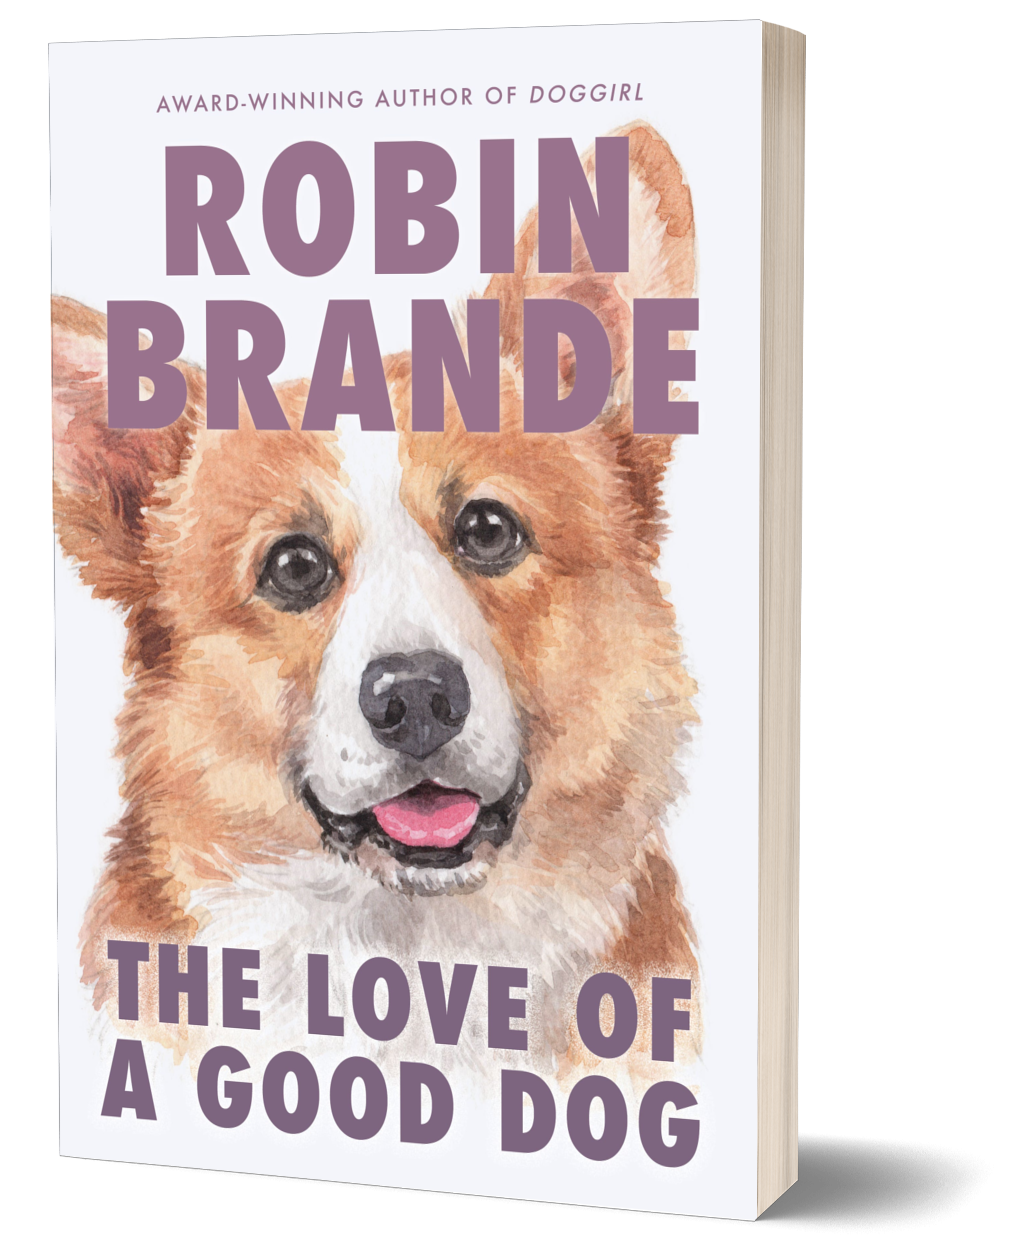 The Love of a Good Dog: Stories for Dog Lovers